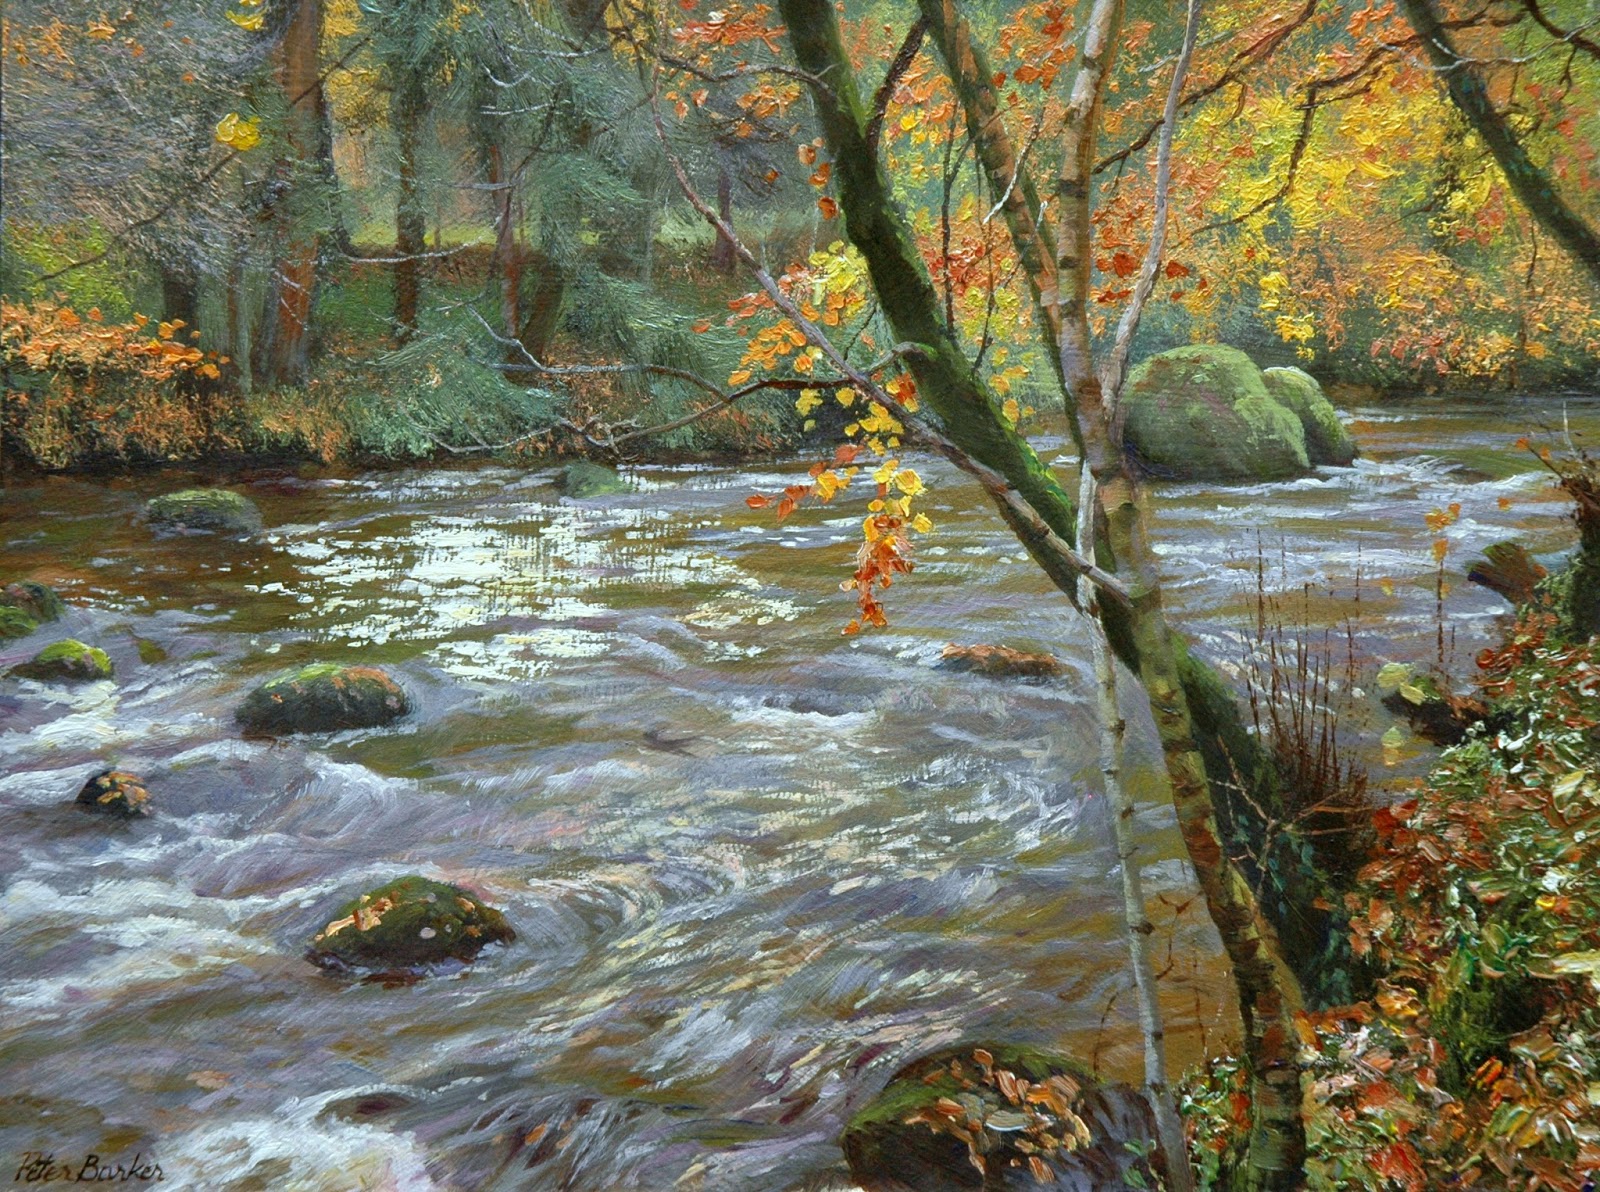 Peter Barker's Palette: Autumn by the Teign